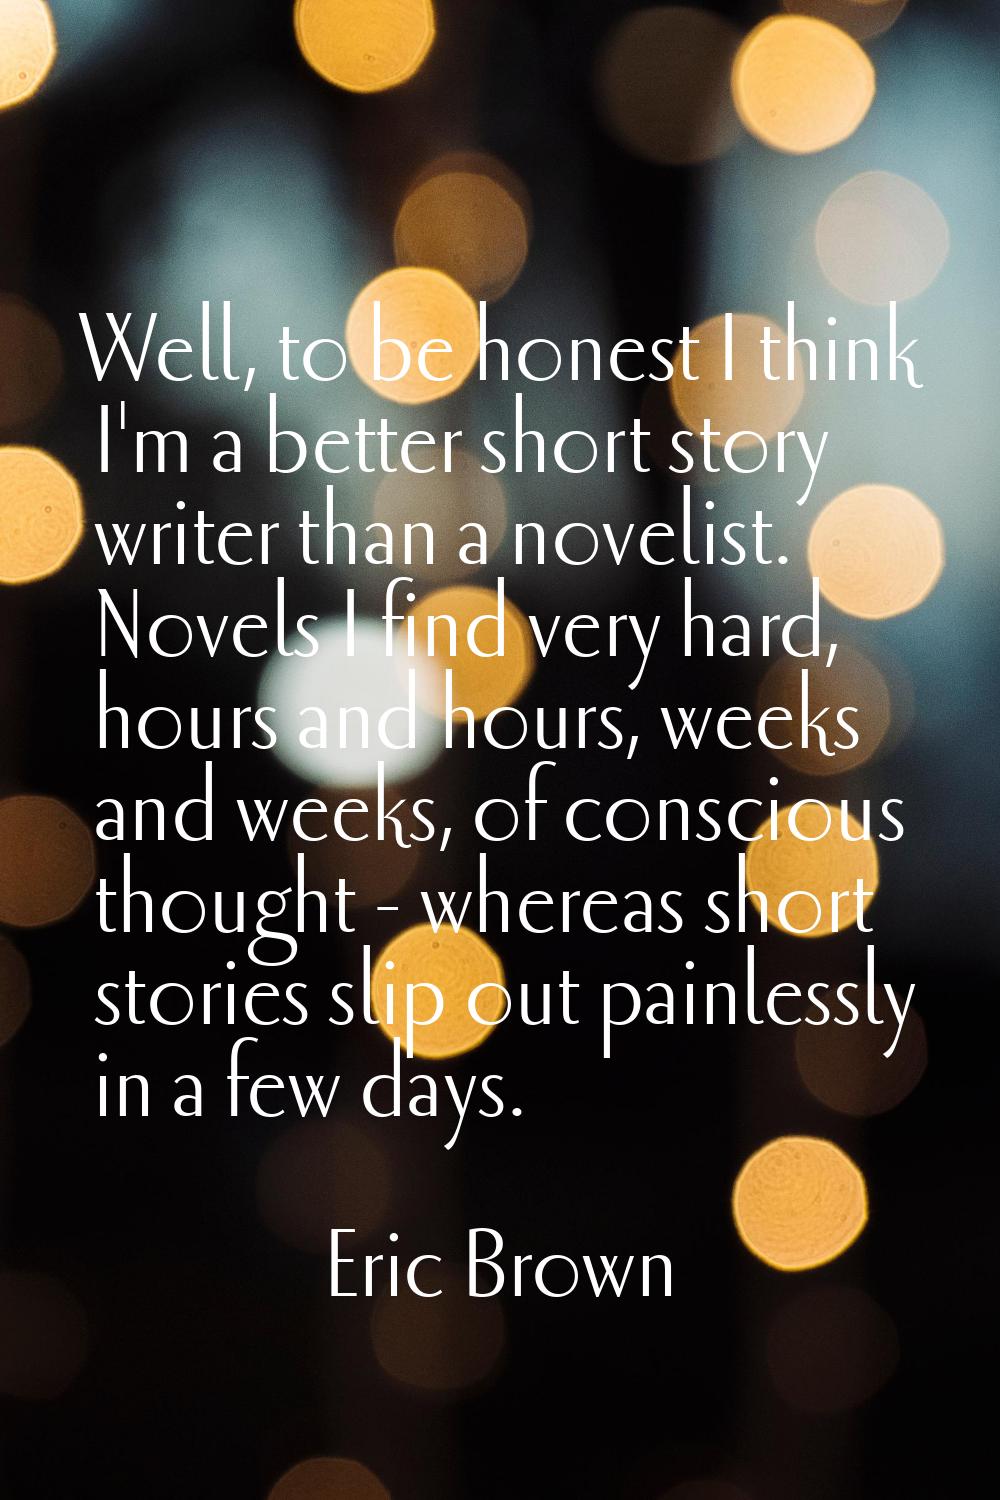 Well, to be honest I think I'm a better short story writer than a novelist. Novels I find very hard